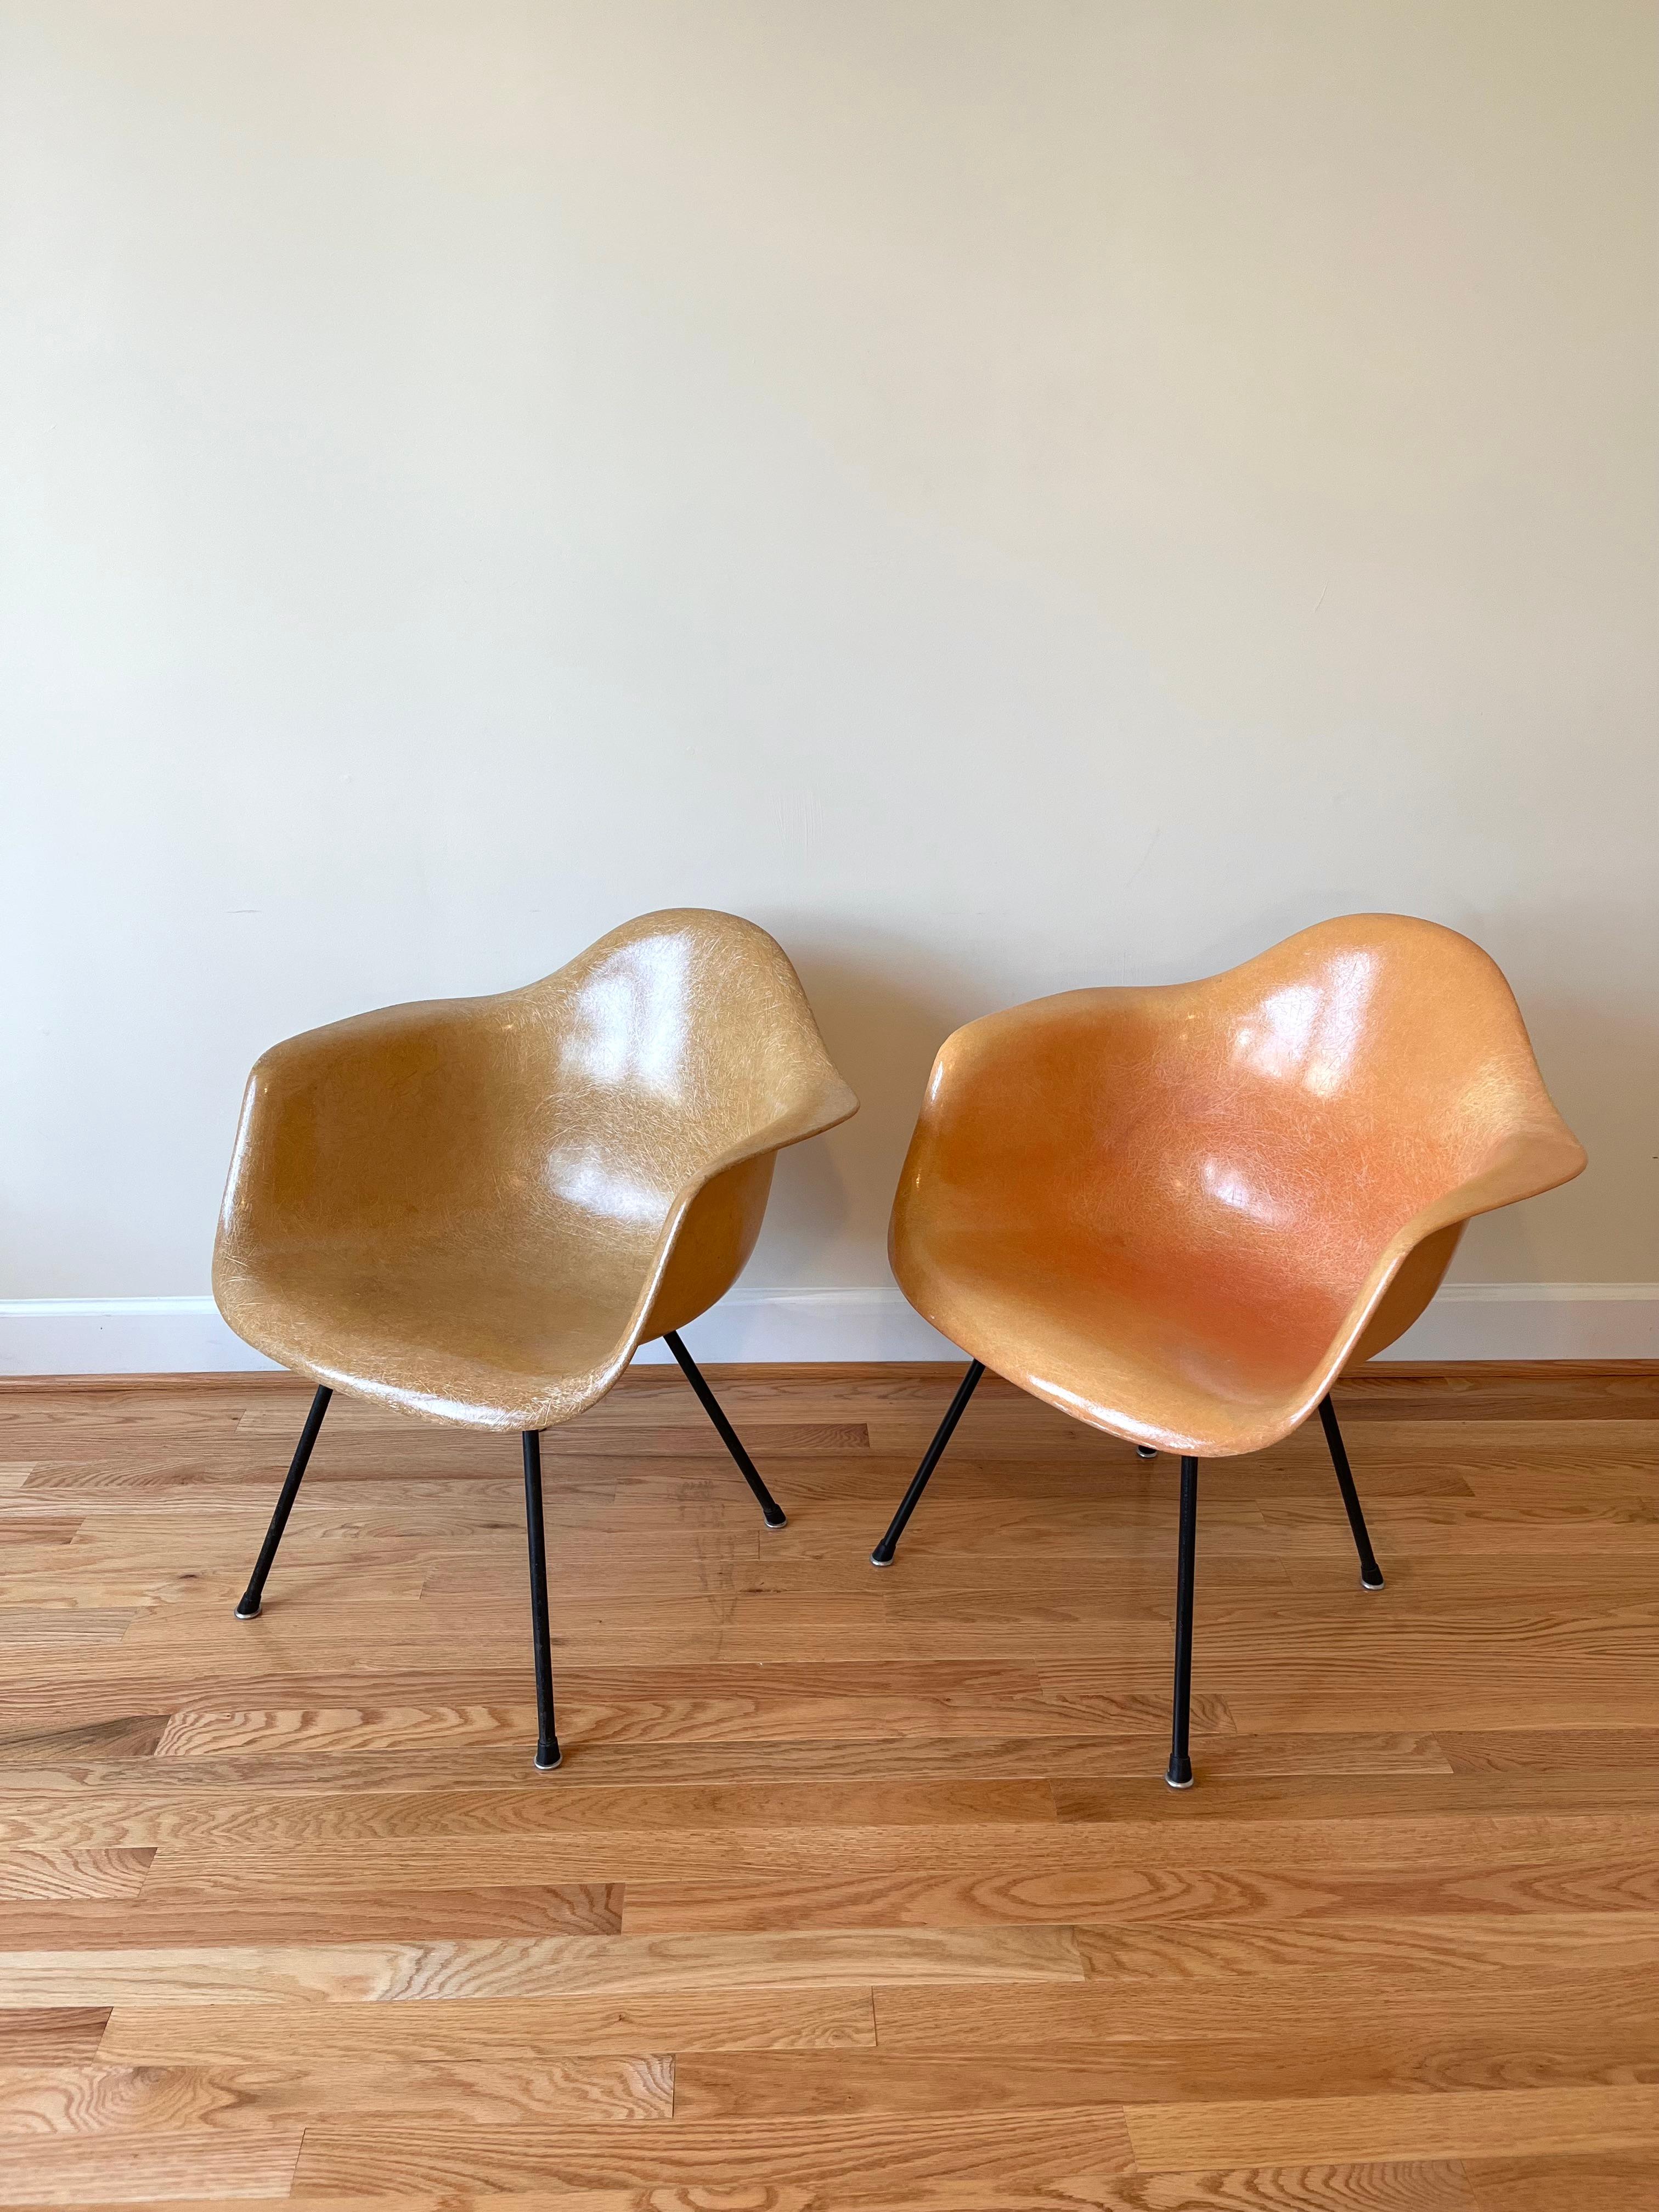 American Eames Max Armchair by Charles and Ray Eames for Herman Miller 'Parchment'